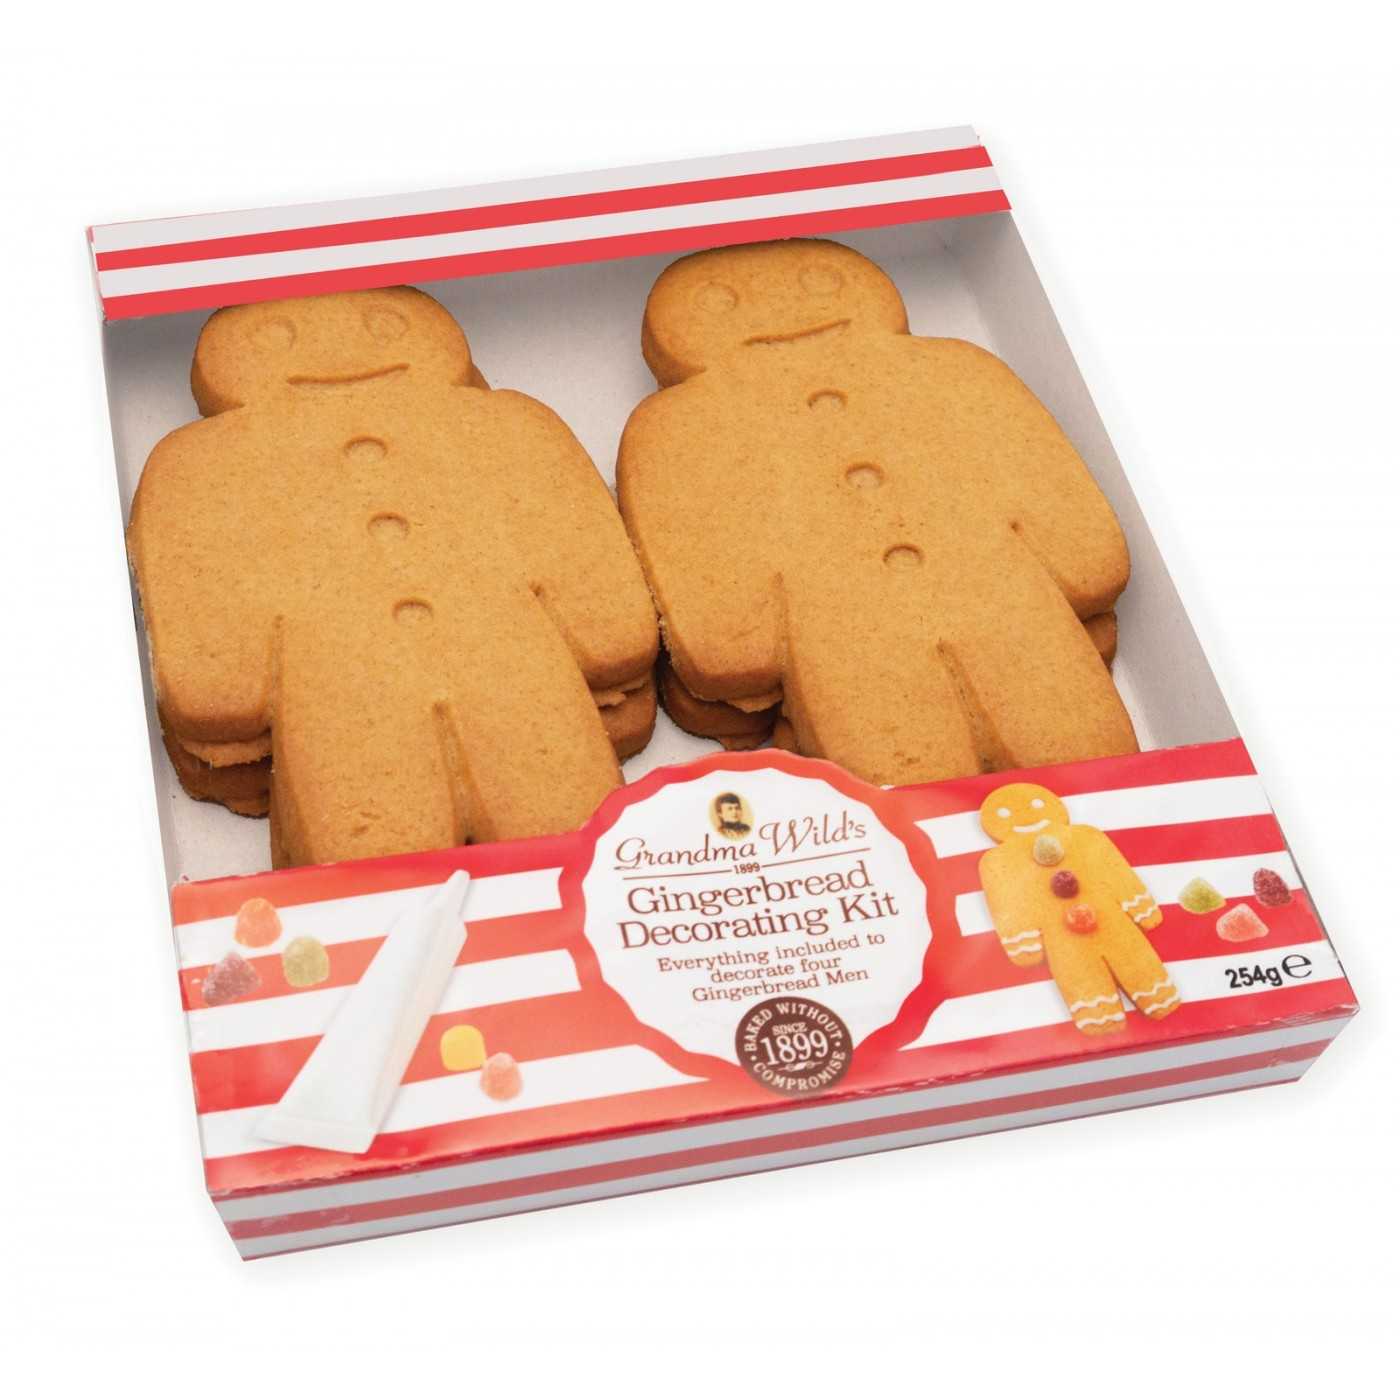 Decorate Your Own Gingerbread Man Kit 254g 12st